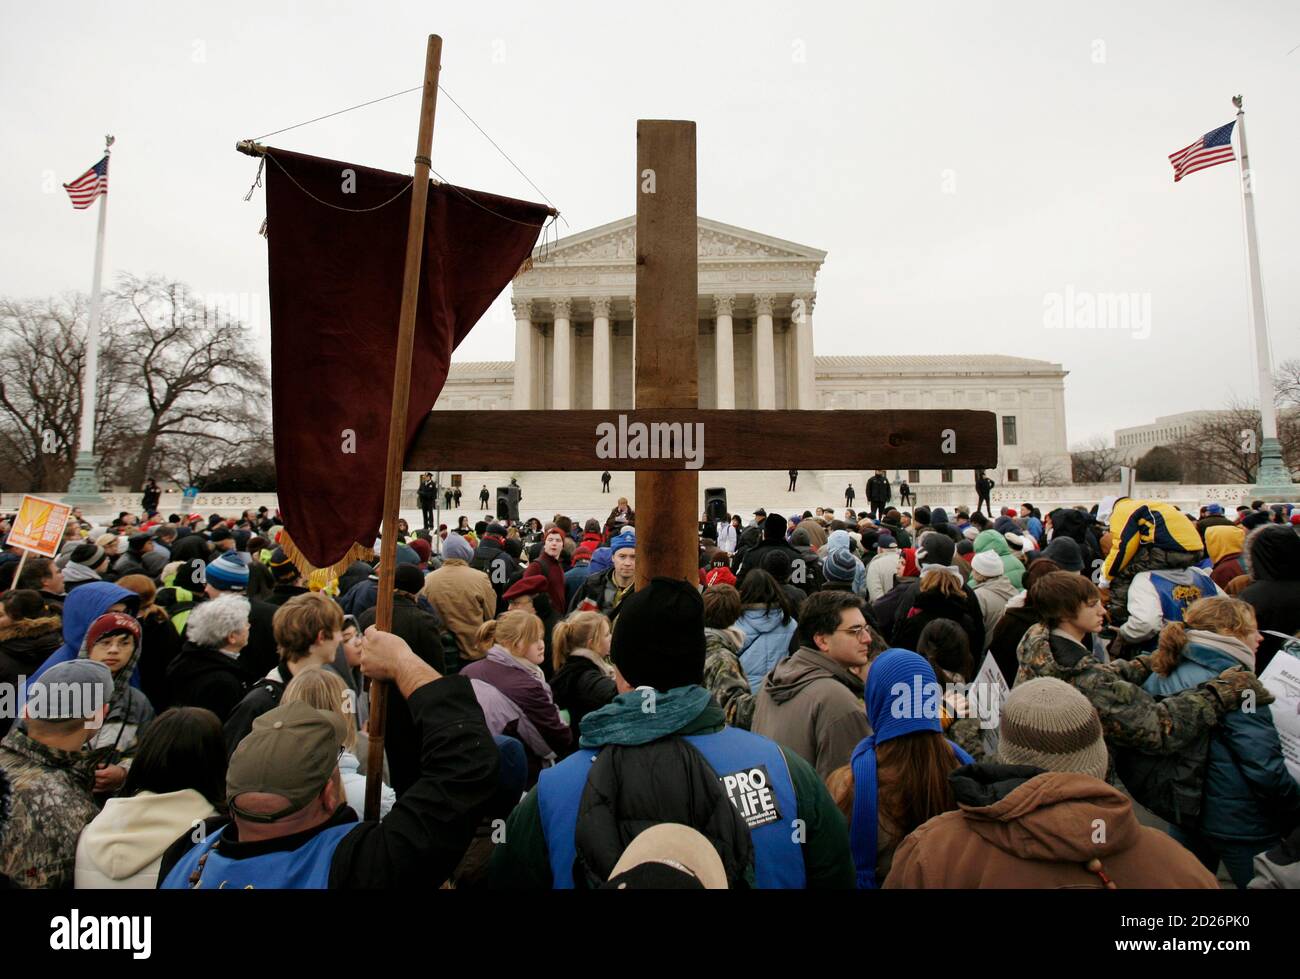 A pro-life demonstrator holds a cross up in front of the U.S. Supreme Court during the 'March for Life', marking the 35th anniversary of the Supreme Court's 1973 decision in Roe vs Wade that made abortion legal, in Washington January 22, 2008.    REUTERS/Kevin Lamarque   (UNITED STATES) Stock Photo